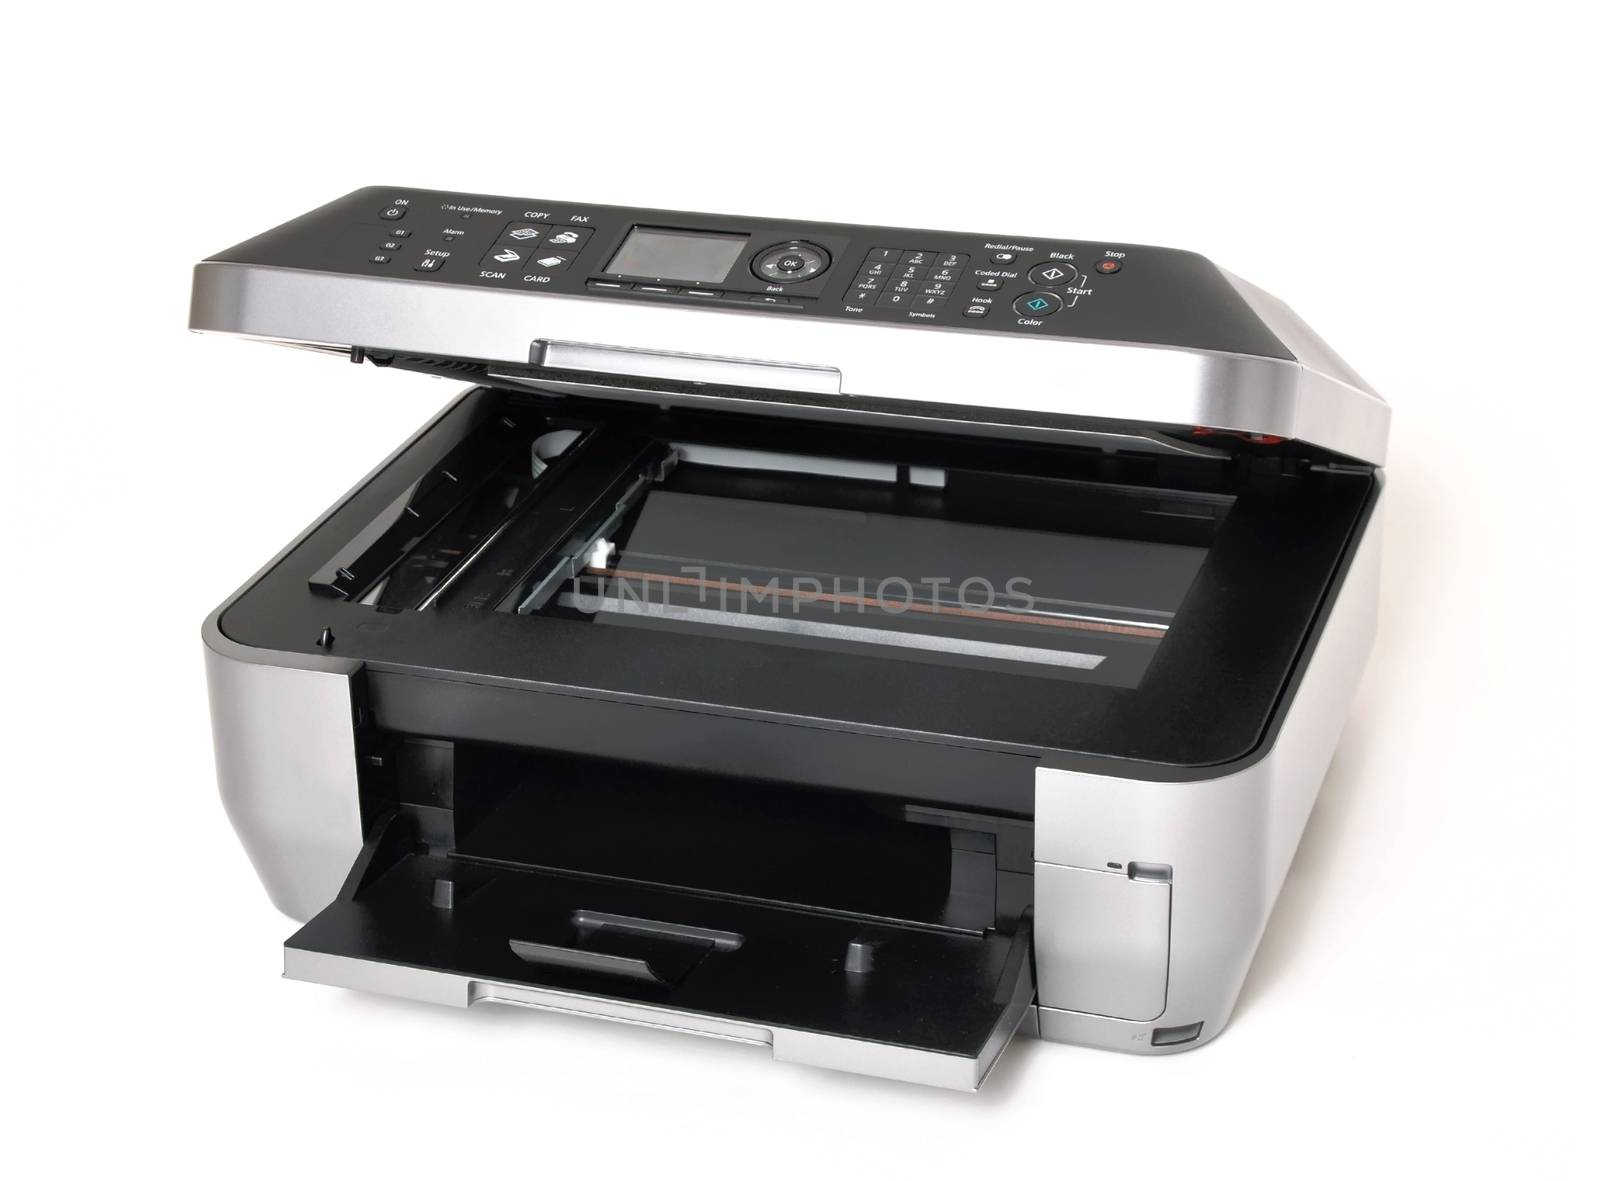 All in one color printer on a white background